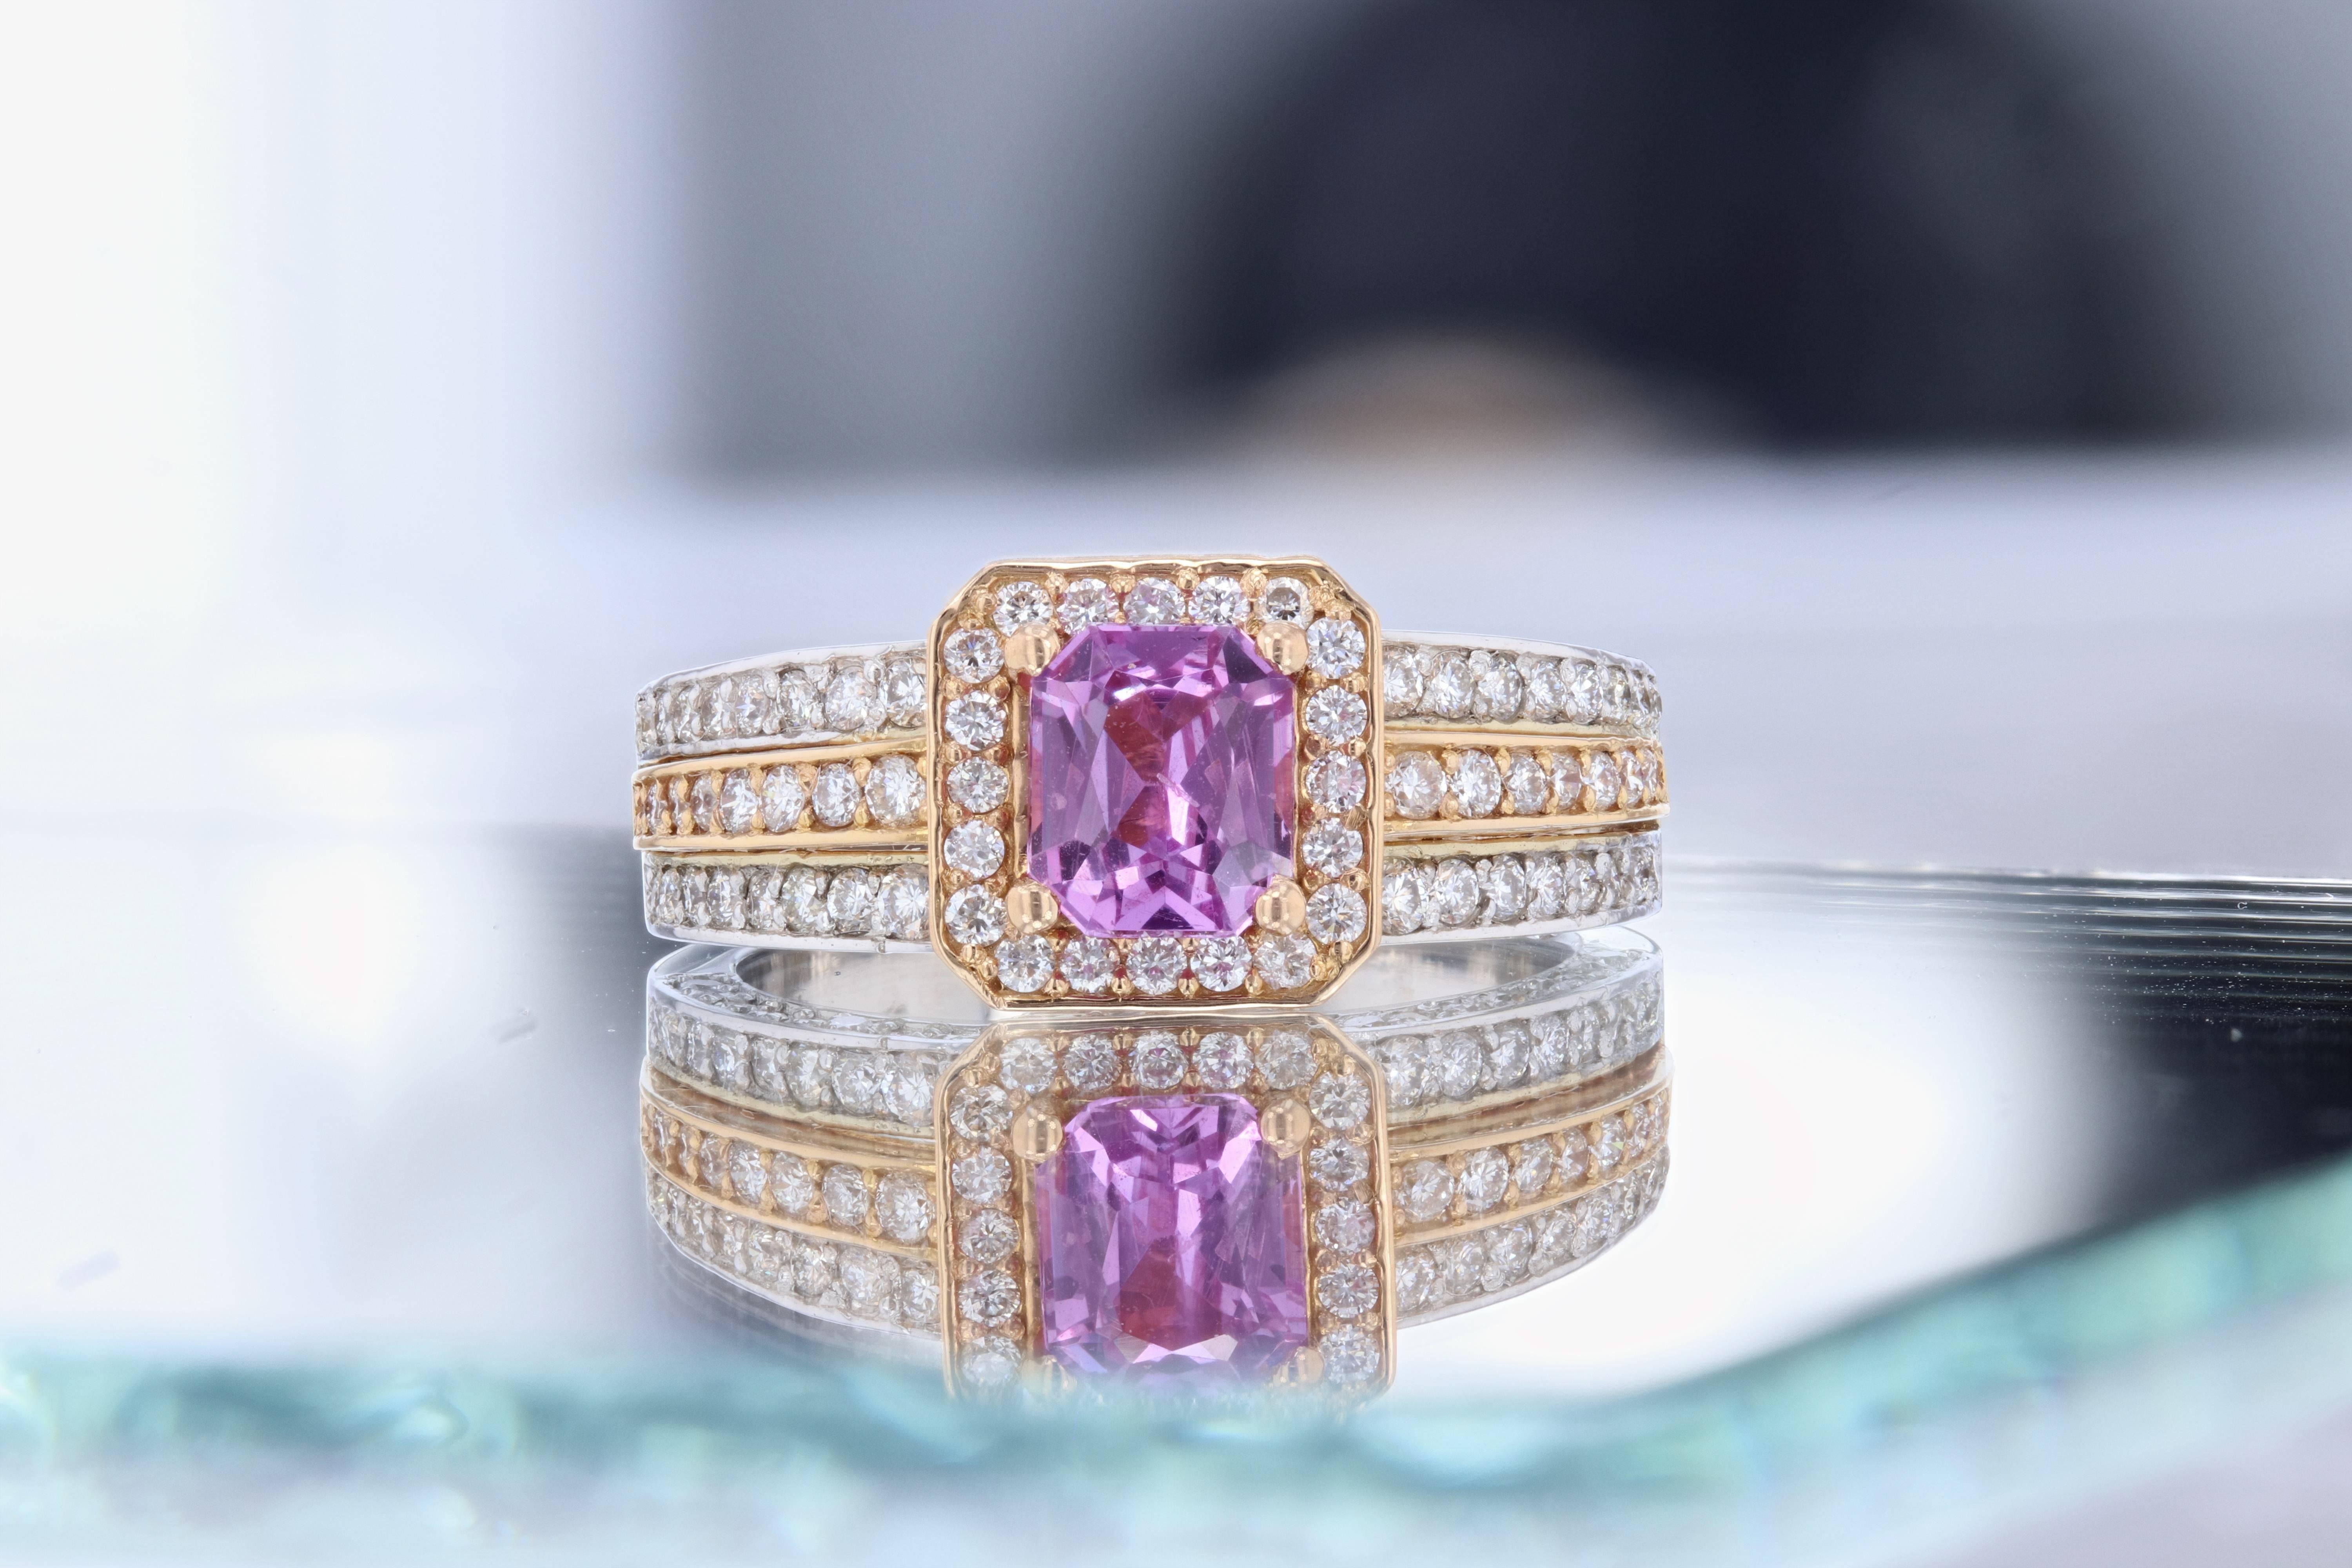 Gorgeous two-tone engagement ring alternative! This ring has a Rectangular Cut 1.07 carat Pink Sapphire in the center of the ring and is surrounded by 126 Round Cut Diamonds that weigh 0.97 carat. This two-tone ring is casted in 18K White and Rose